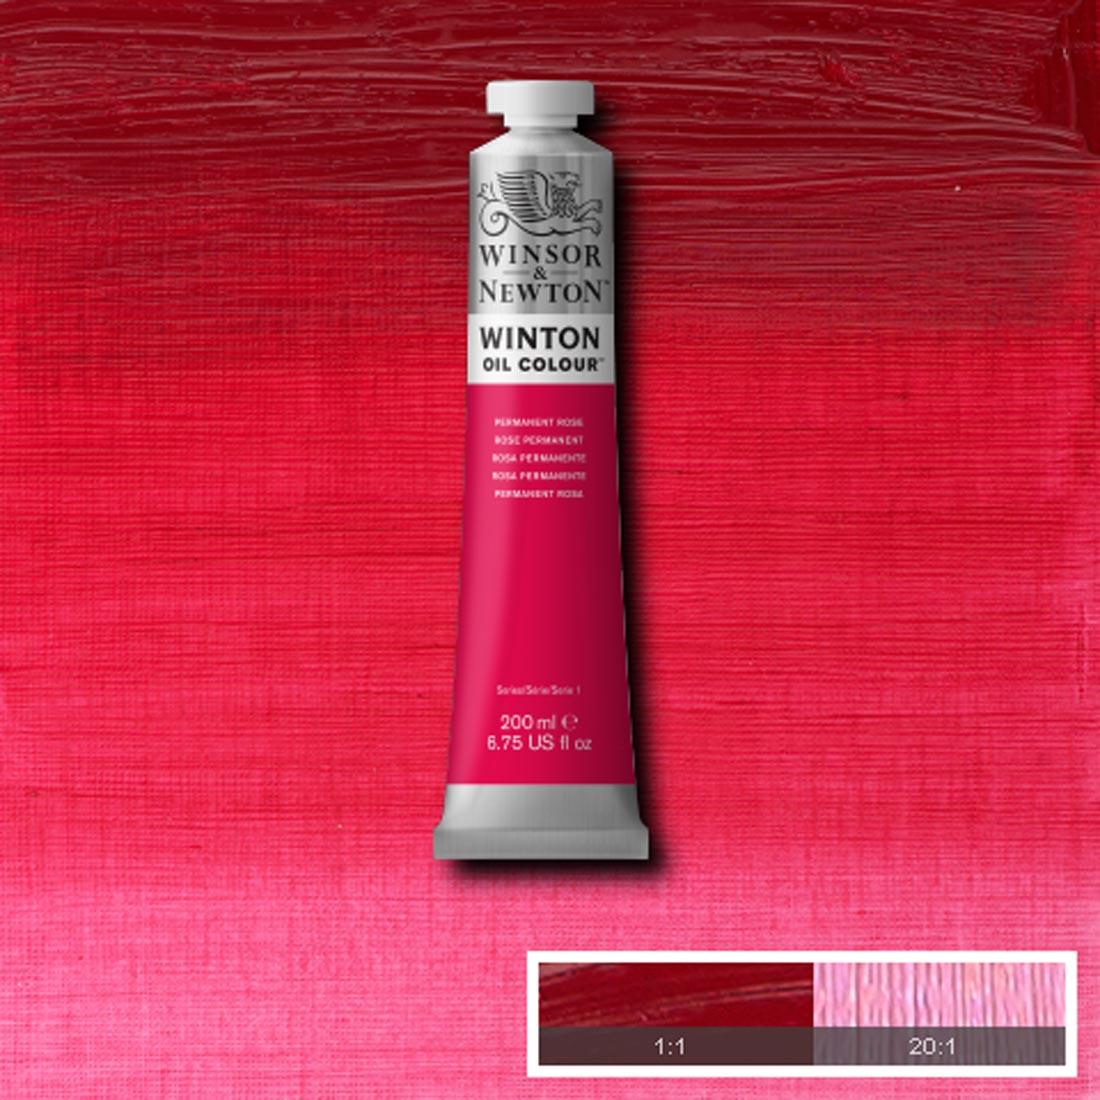 Tube of Permanent Rose Winsor & Newton Winton Oil Colour with a paint swatch for the background